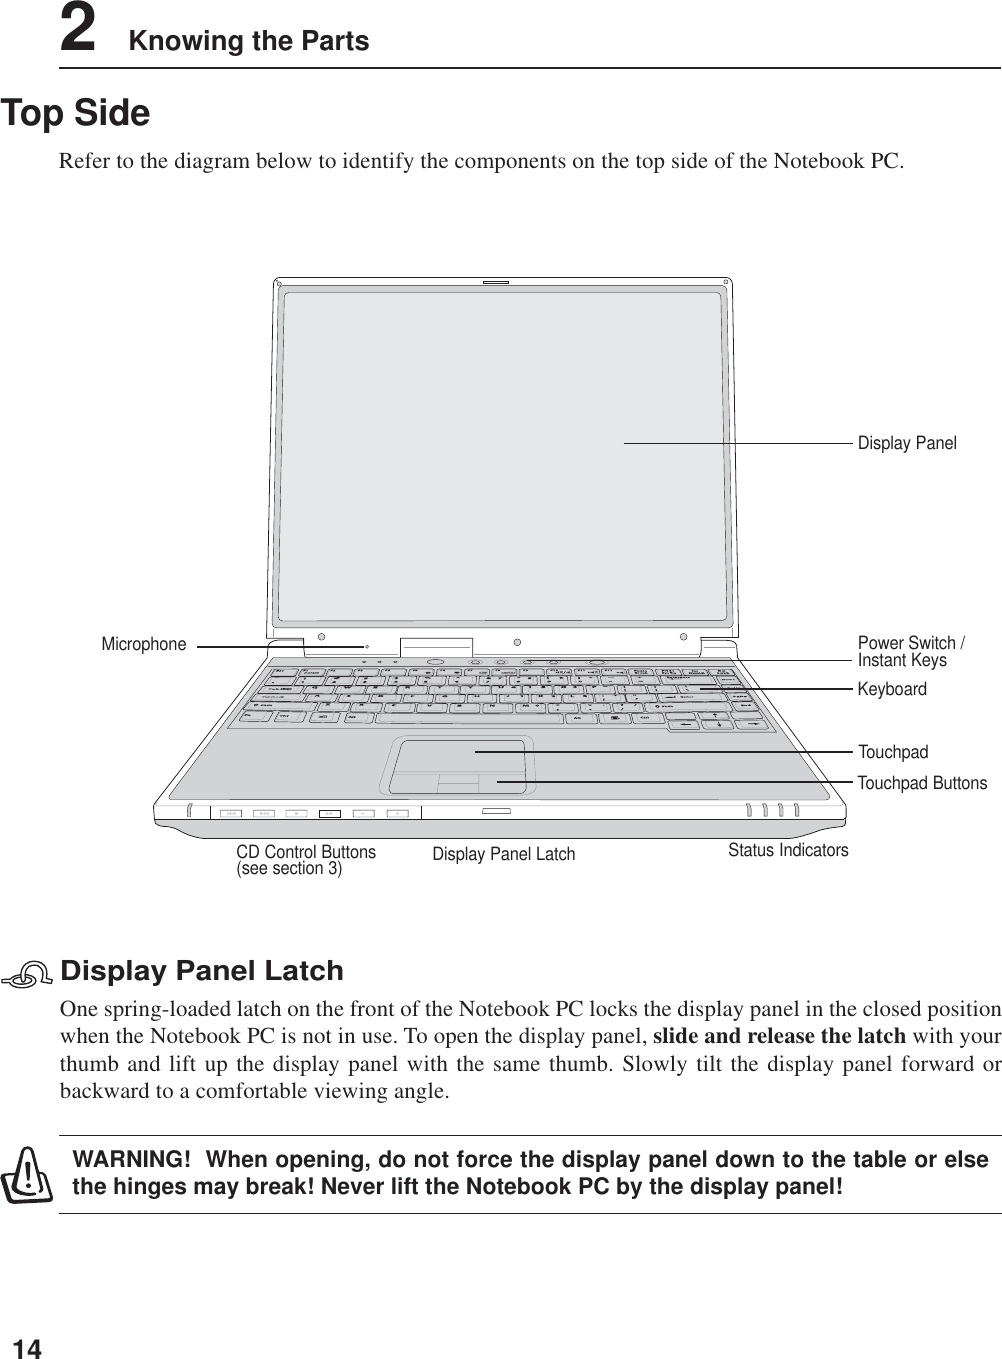 142    Knowing the PartsTop SideRefer to the diagram below to identify the components on the top side of the Notebook PC.Display PanelTouchpad ButtonsKeyboardTouchpadPower Switch /Instant KeysStatus IndicatorsMicrophoneCD Control Buttons(see section 3)Display Panel LatchOne spring-loaded latch on the front of the Notebook PC locks the display panel in the closed positionwhen the Notebook PC is not in use. To open the display panel, slide and release the latch with yourthumb and lift up the display panel with the same thumb. Slowly tilt the display panel forward orbackward to a comfortable viewing angle.WARNING!  When opening, do not force the display panel down to the table or elsethe hinges may break! Never lift the Notebook PC by the display panel!Display Panel Latch